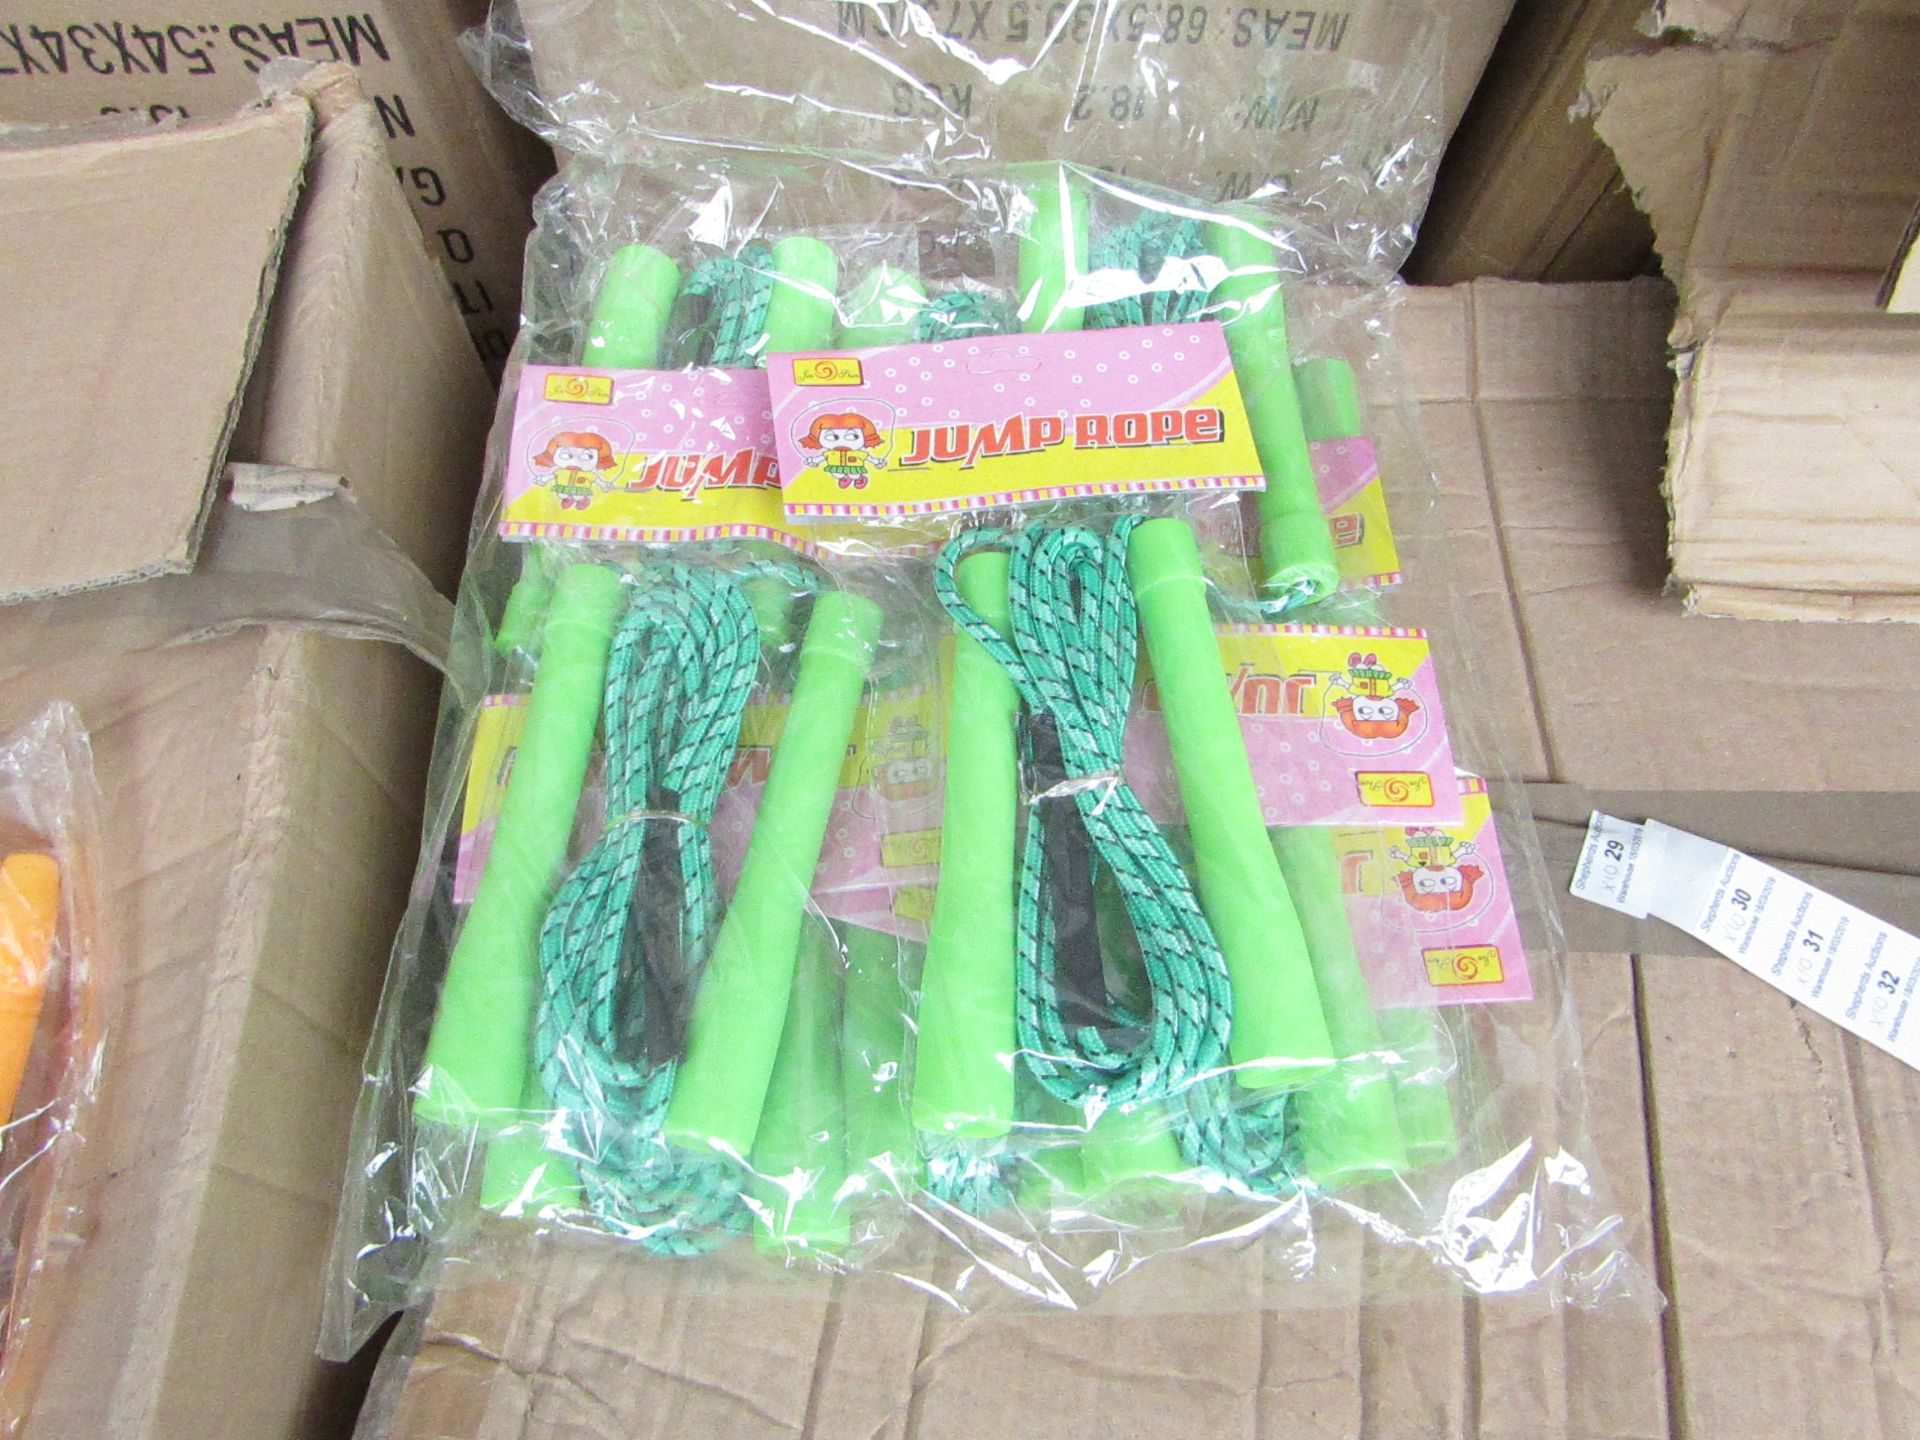 10x Leaping ability Plastic handle skipping ropes.